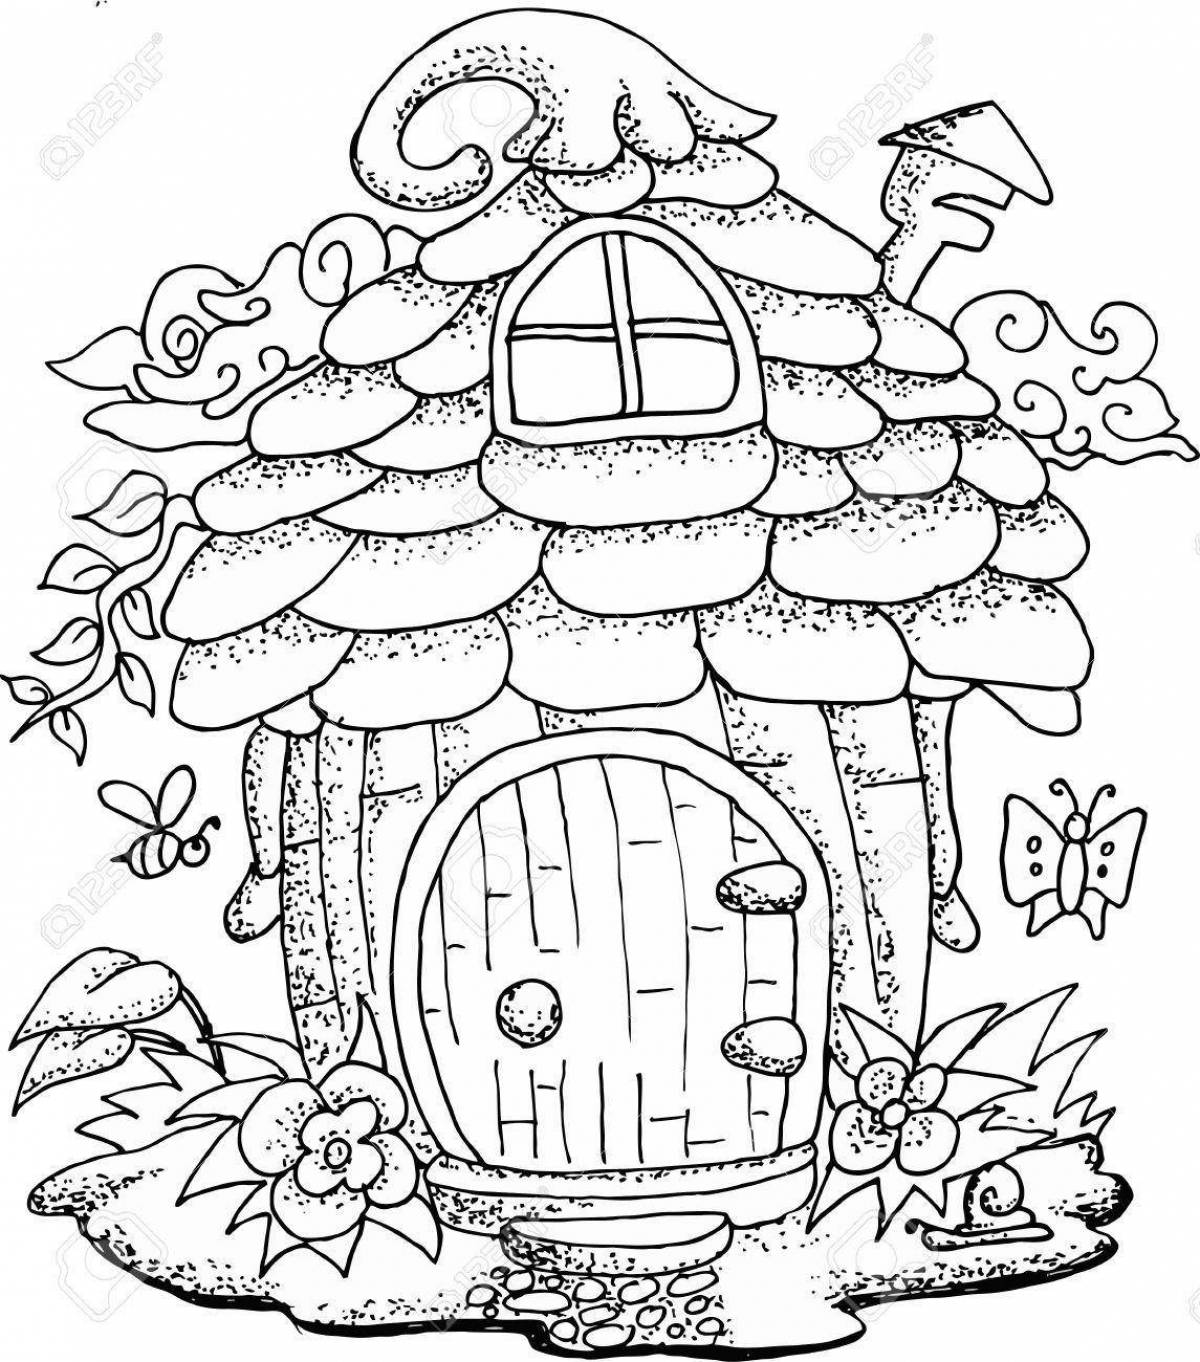 Wonderful fairy house coloring book